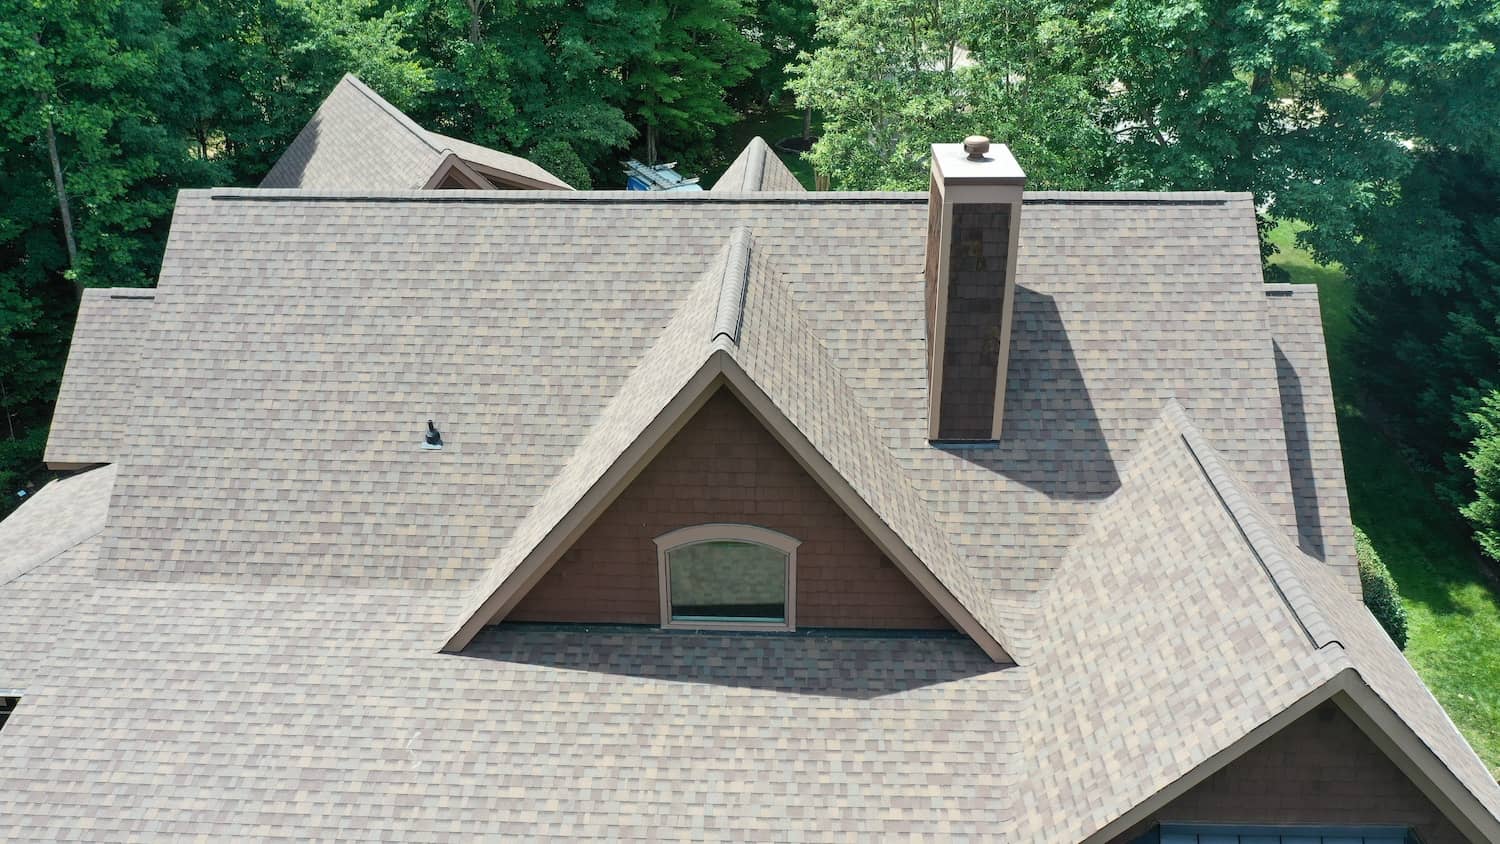 http://aerial%20view%20of%20trudefinition%20duration%20teak%20shingles%20on%20residential%20home%20with%20chimney